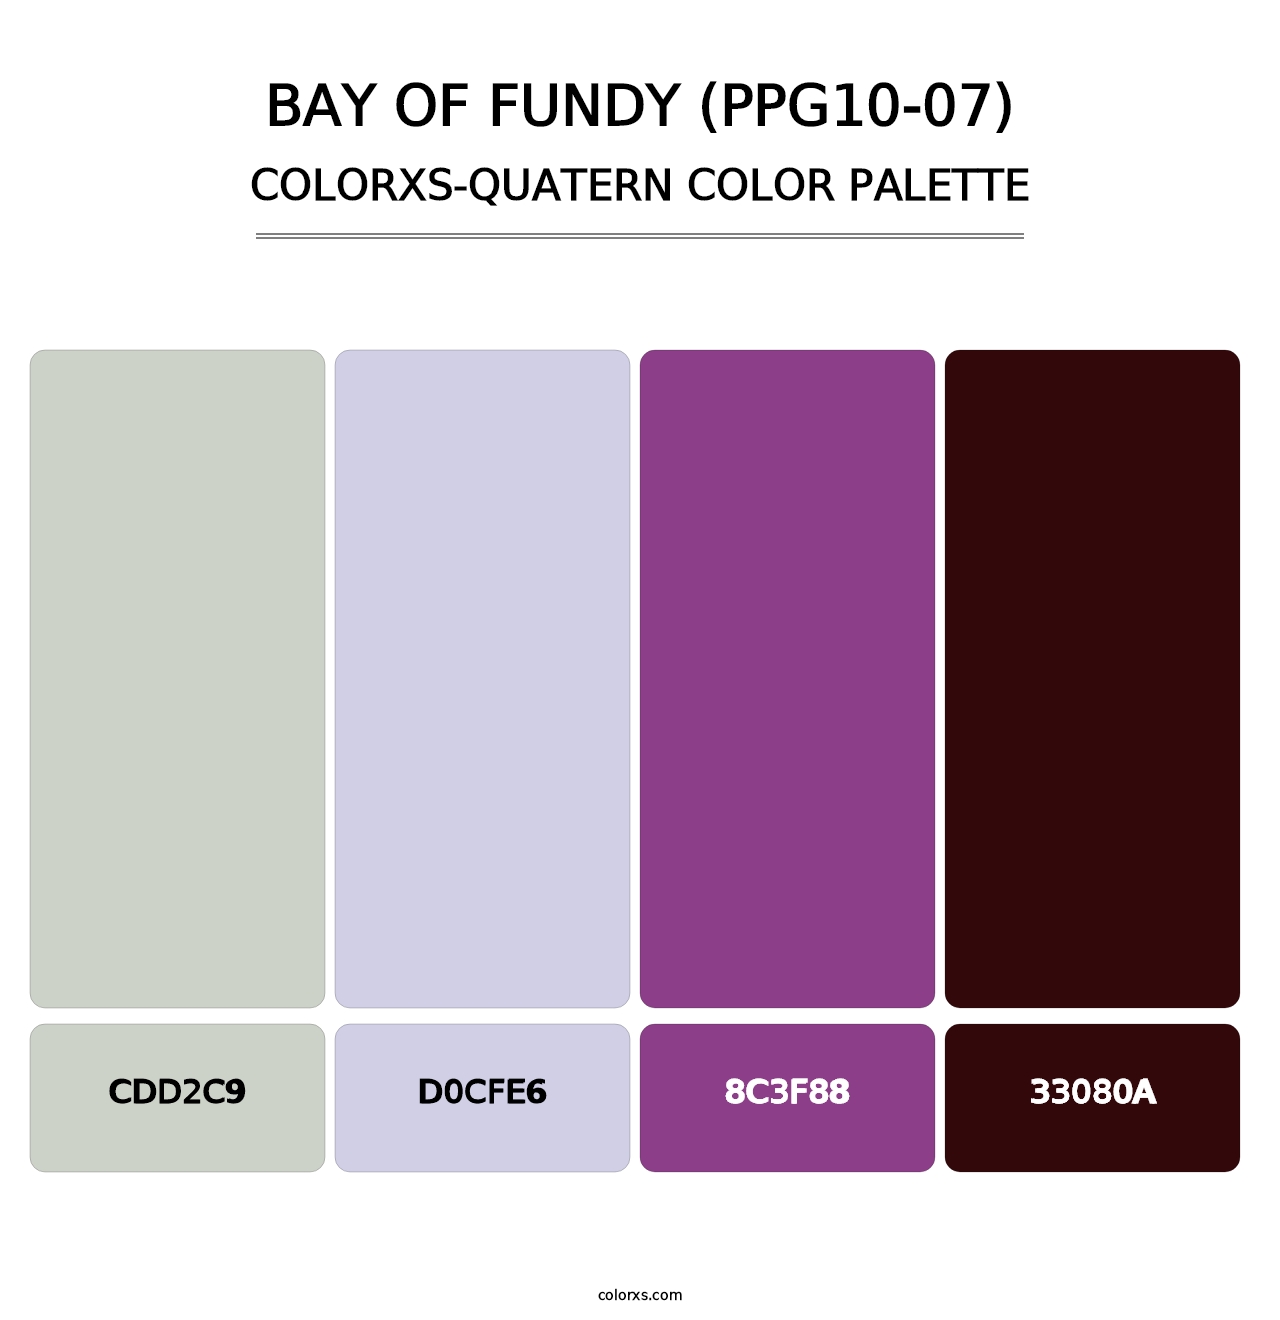 Bay Of Fundy (PPG10-07) - Colorxs Quatern Palette